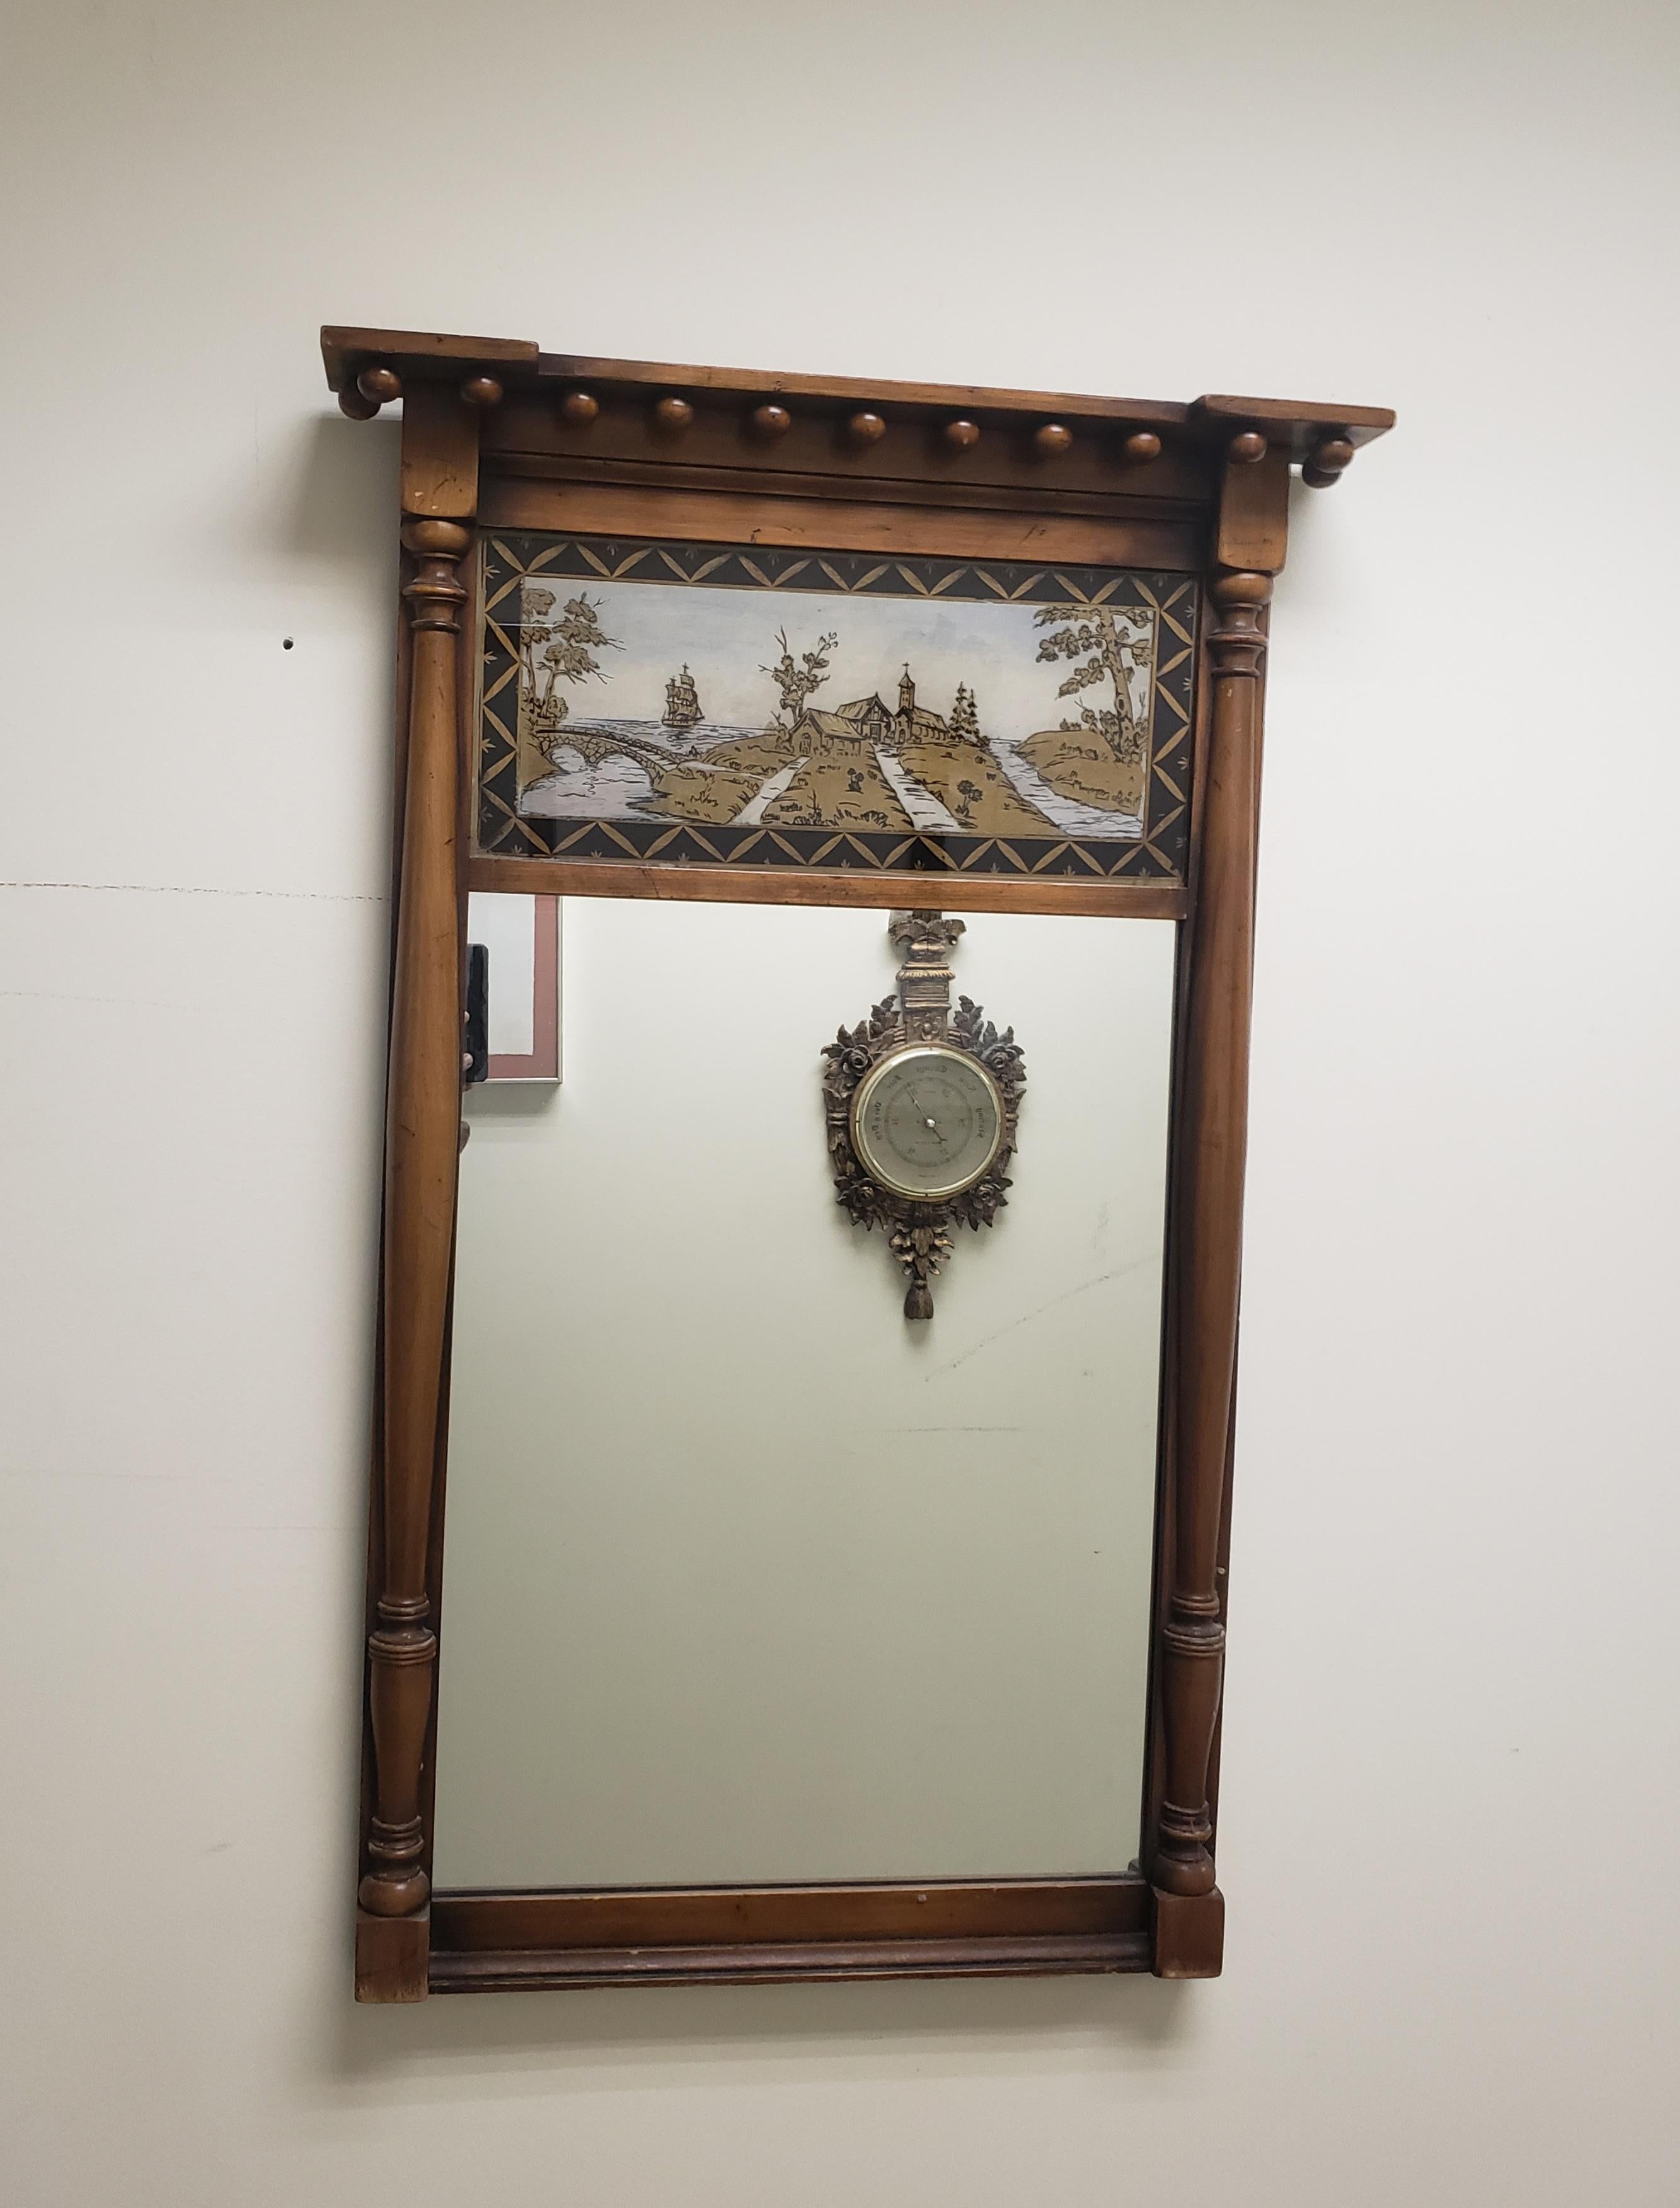 Beautiful early 20th century Federal style mahogany and Eglomise wall Trumeau mirror. Measures 24.25